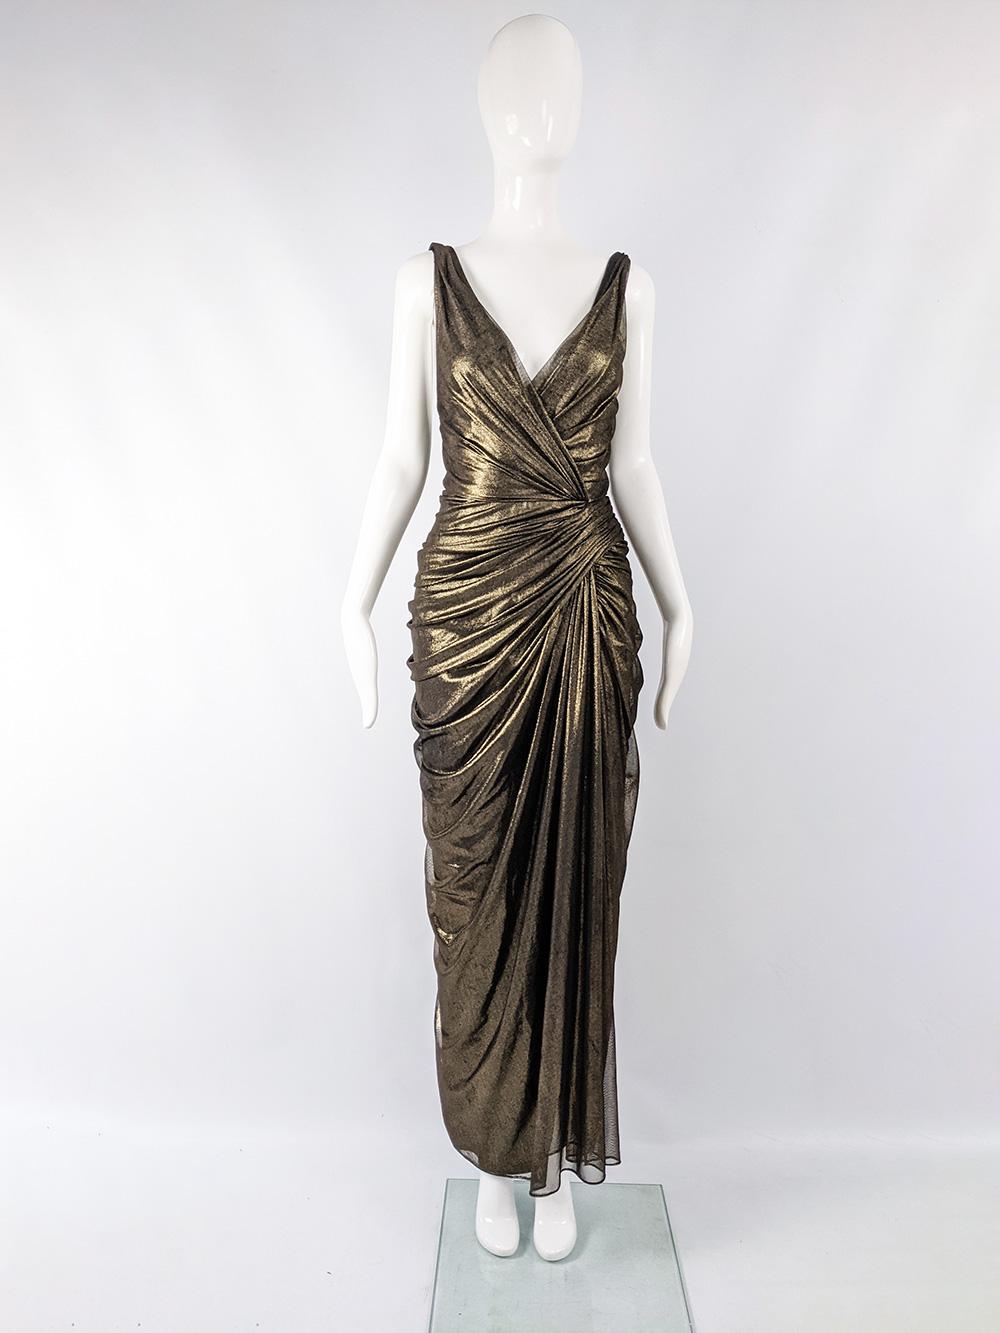 A stunning vintage sleeveless evening gown from the late 80s / early 90s by luxury American-Japanese designer, Tadashi Shoji. In a black and gold mesh fabric with beautiful draping and gathering crossing over at the hips. The rear has a sexy